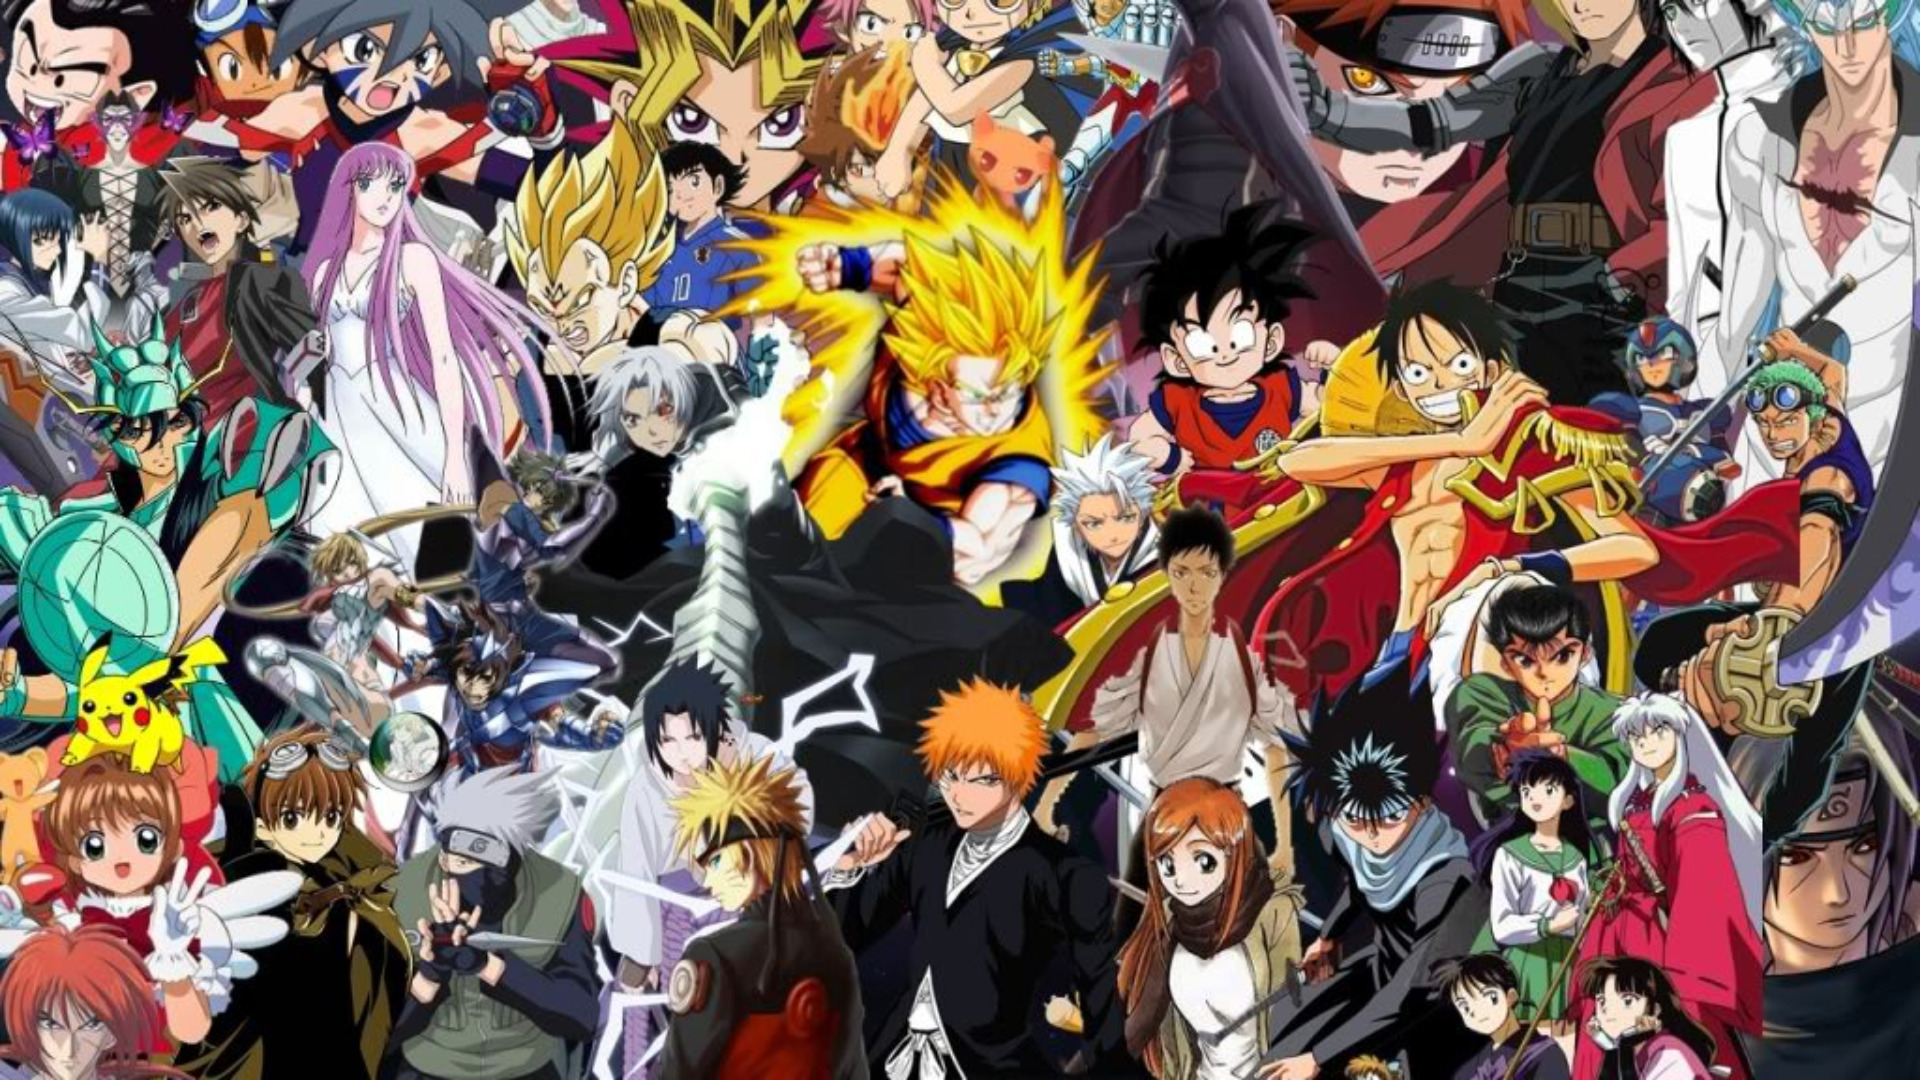 Who Do You Think Is The Strongest Anime Characters - Lot Of Anime  Characters - 1920x1080 Wallpaper 